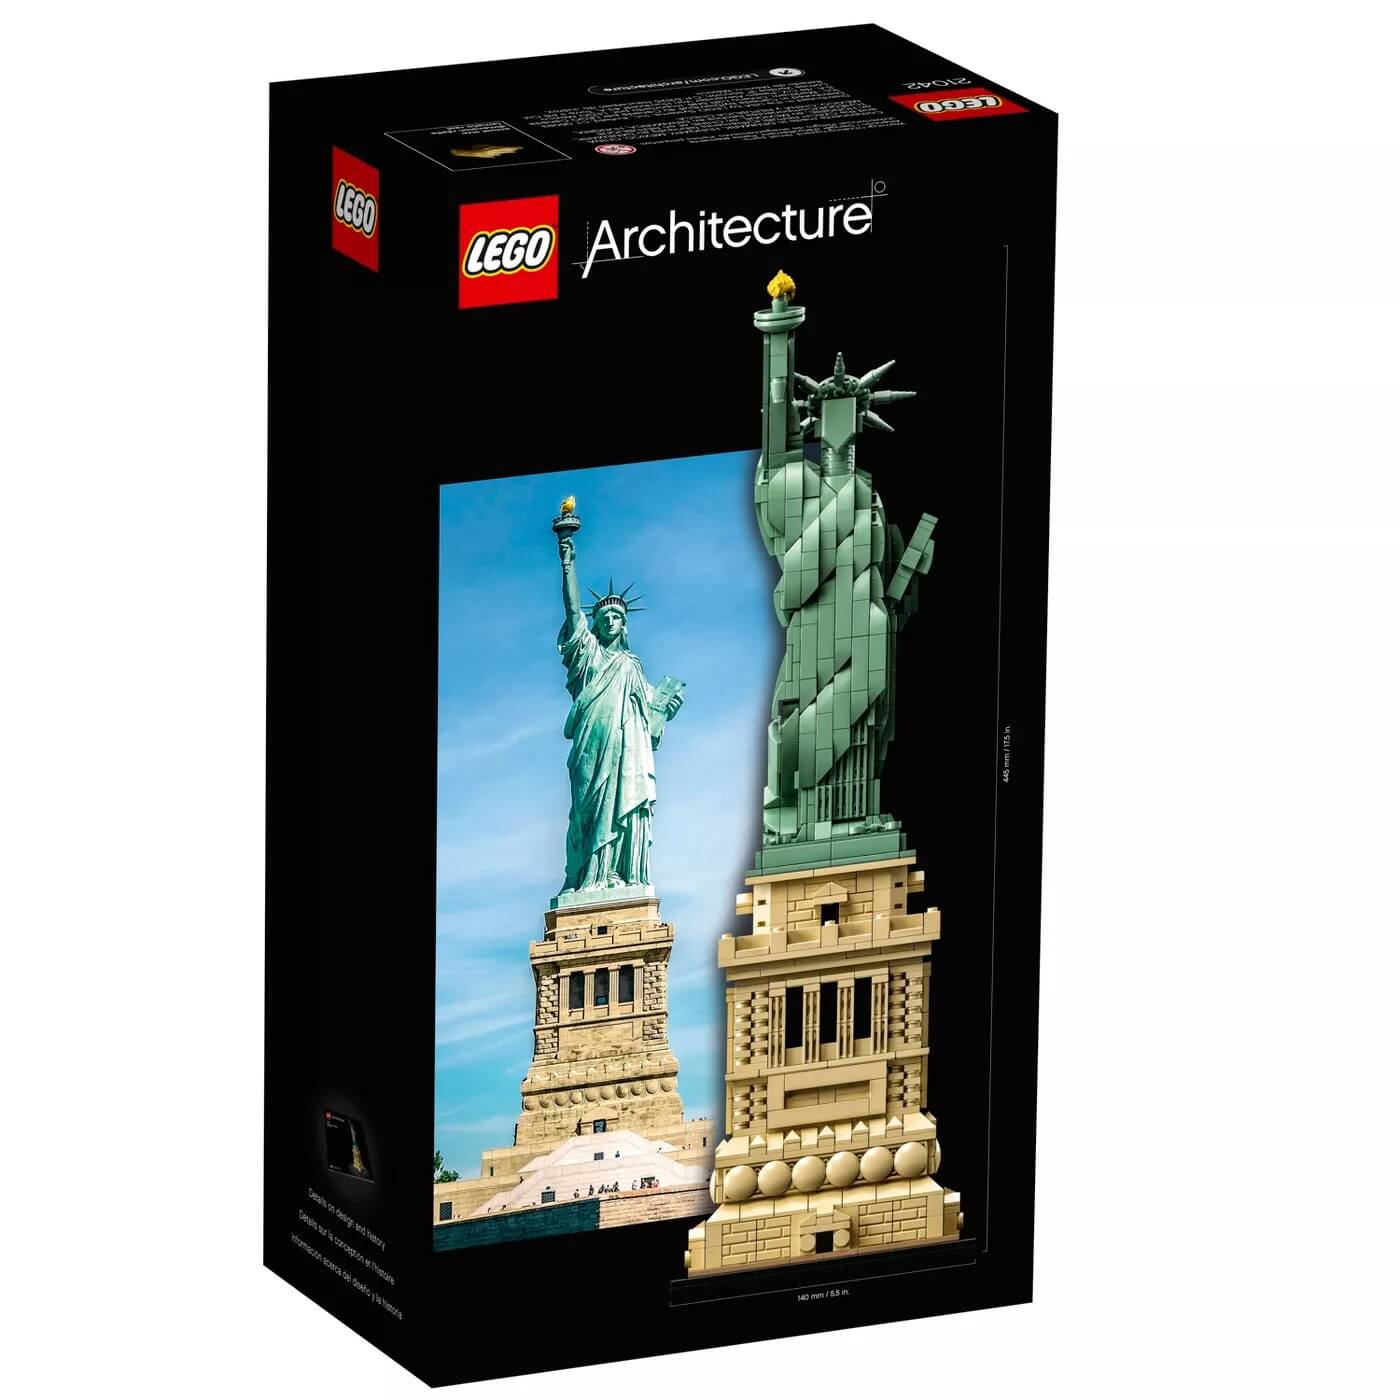 LEGO Statue of Liberty 1685 Pieces Toy Set